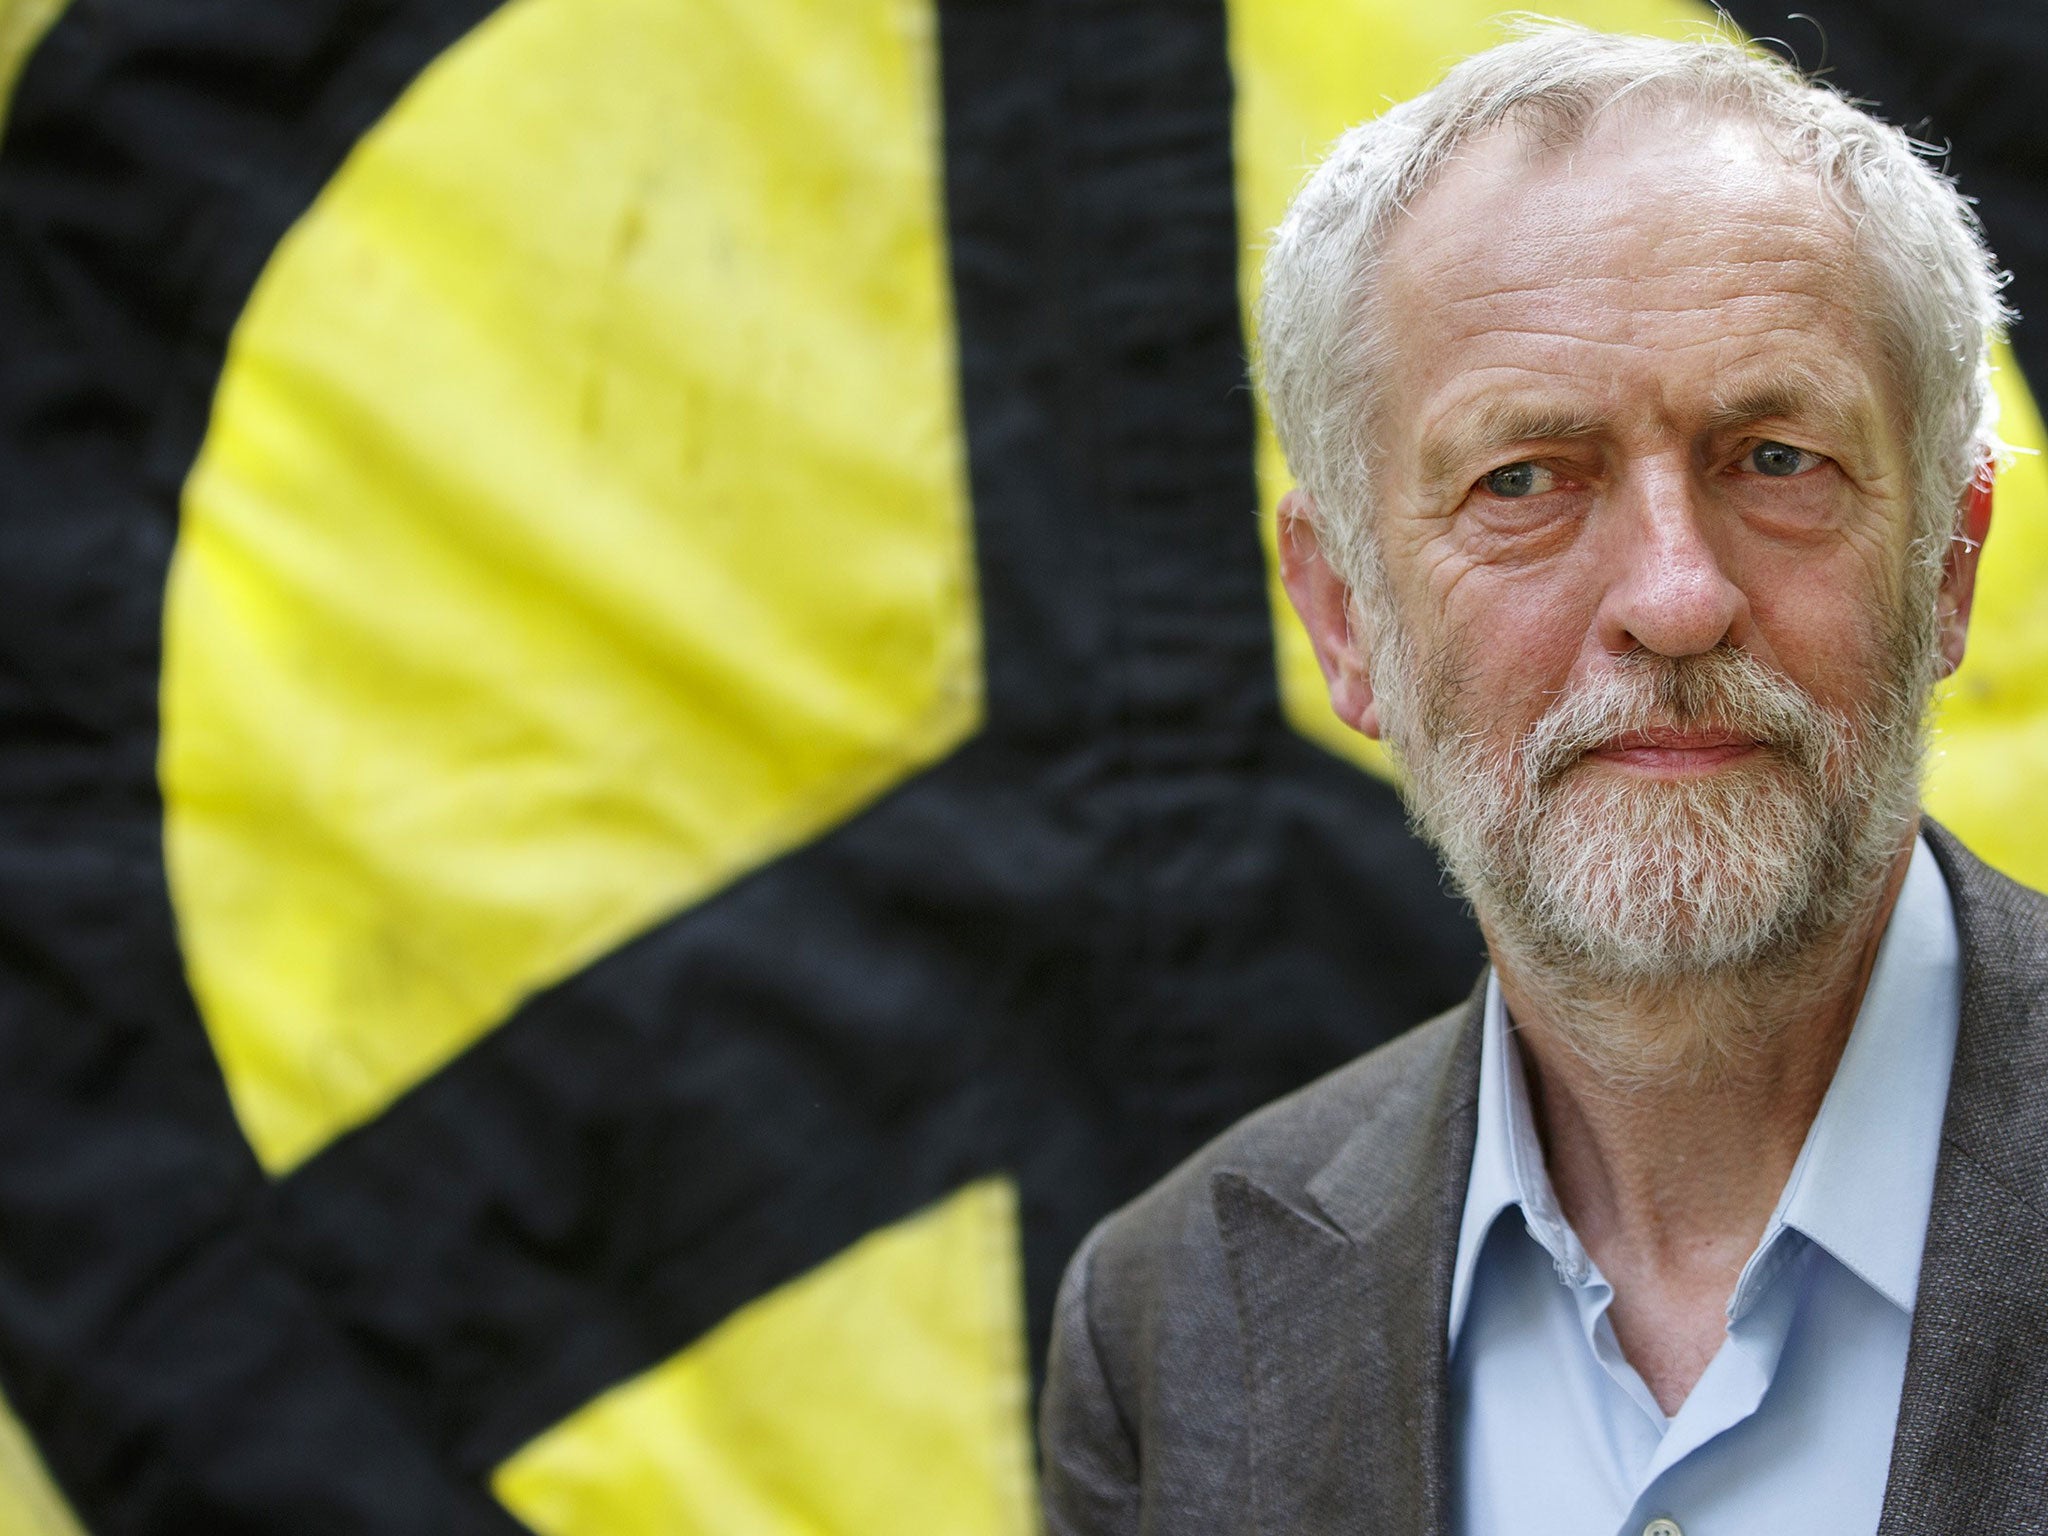 Jeremy Corbyn has also come under fire from internal critics over his close links with CND